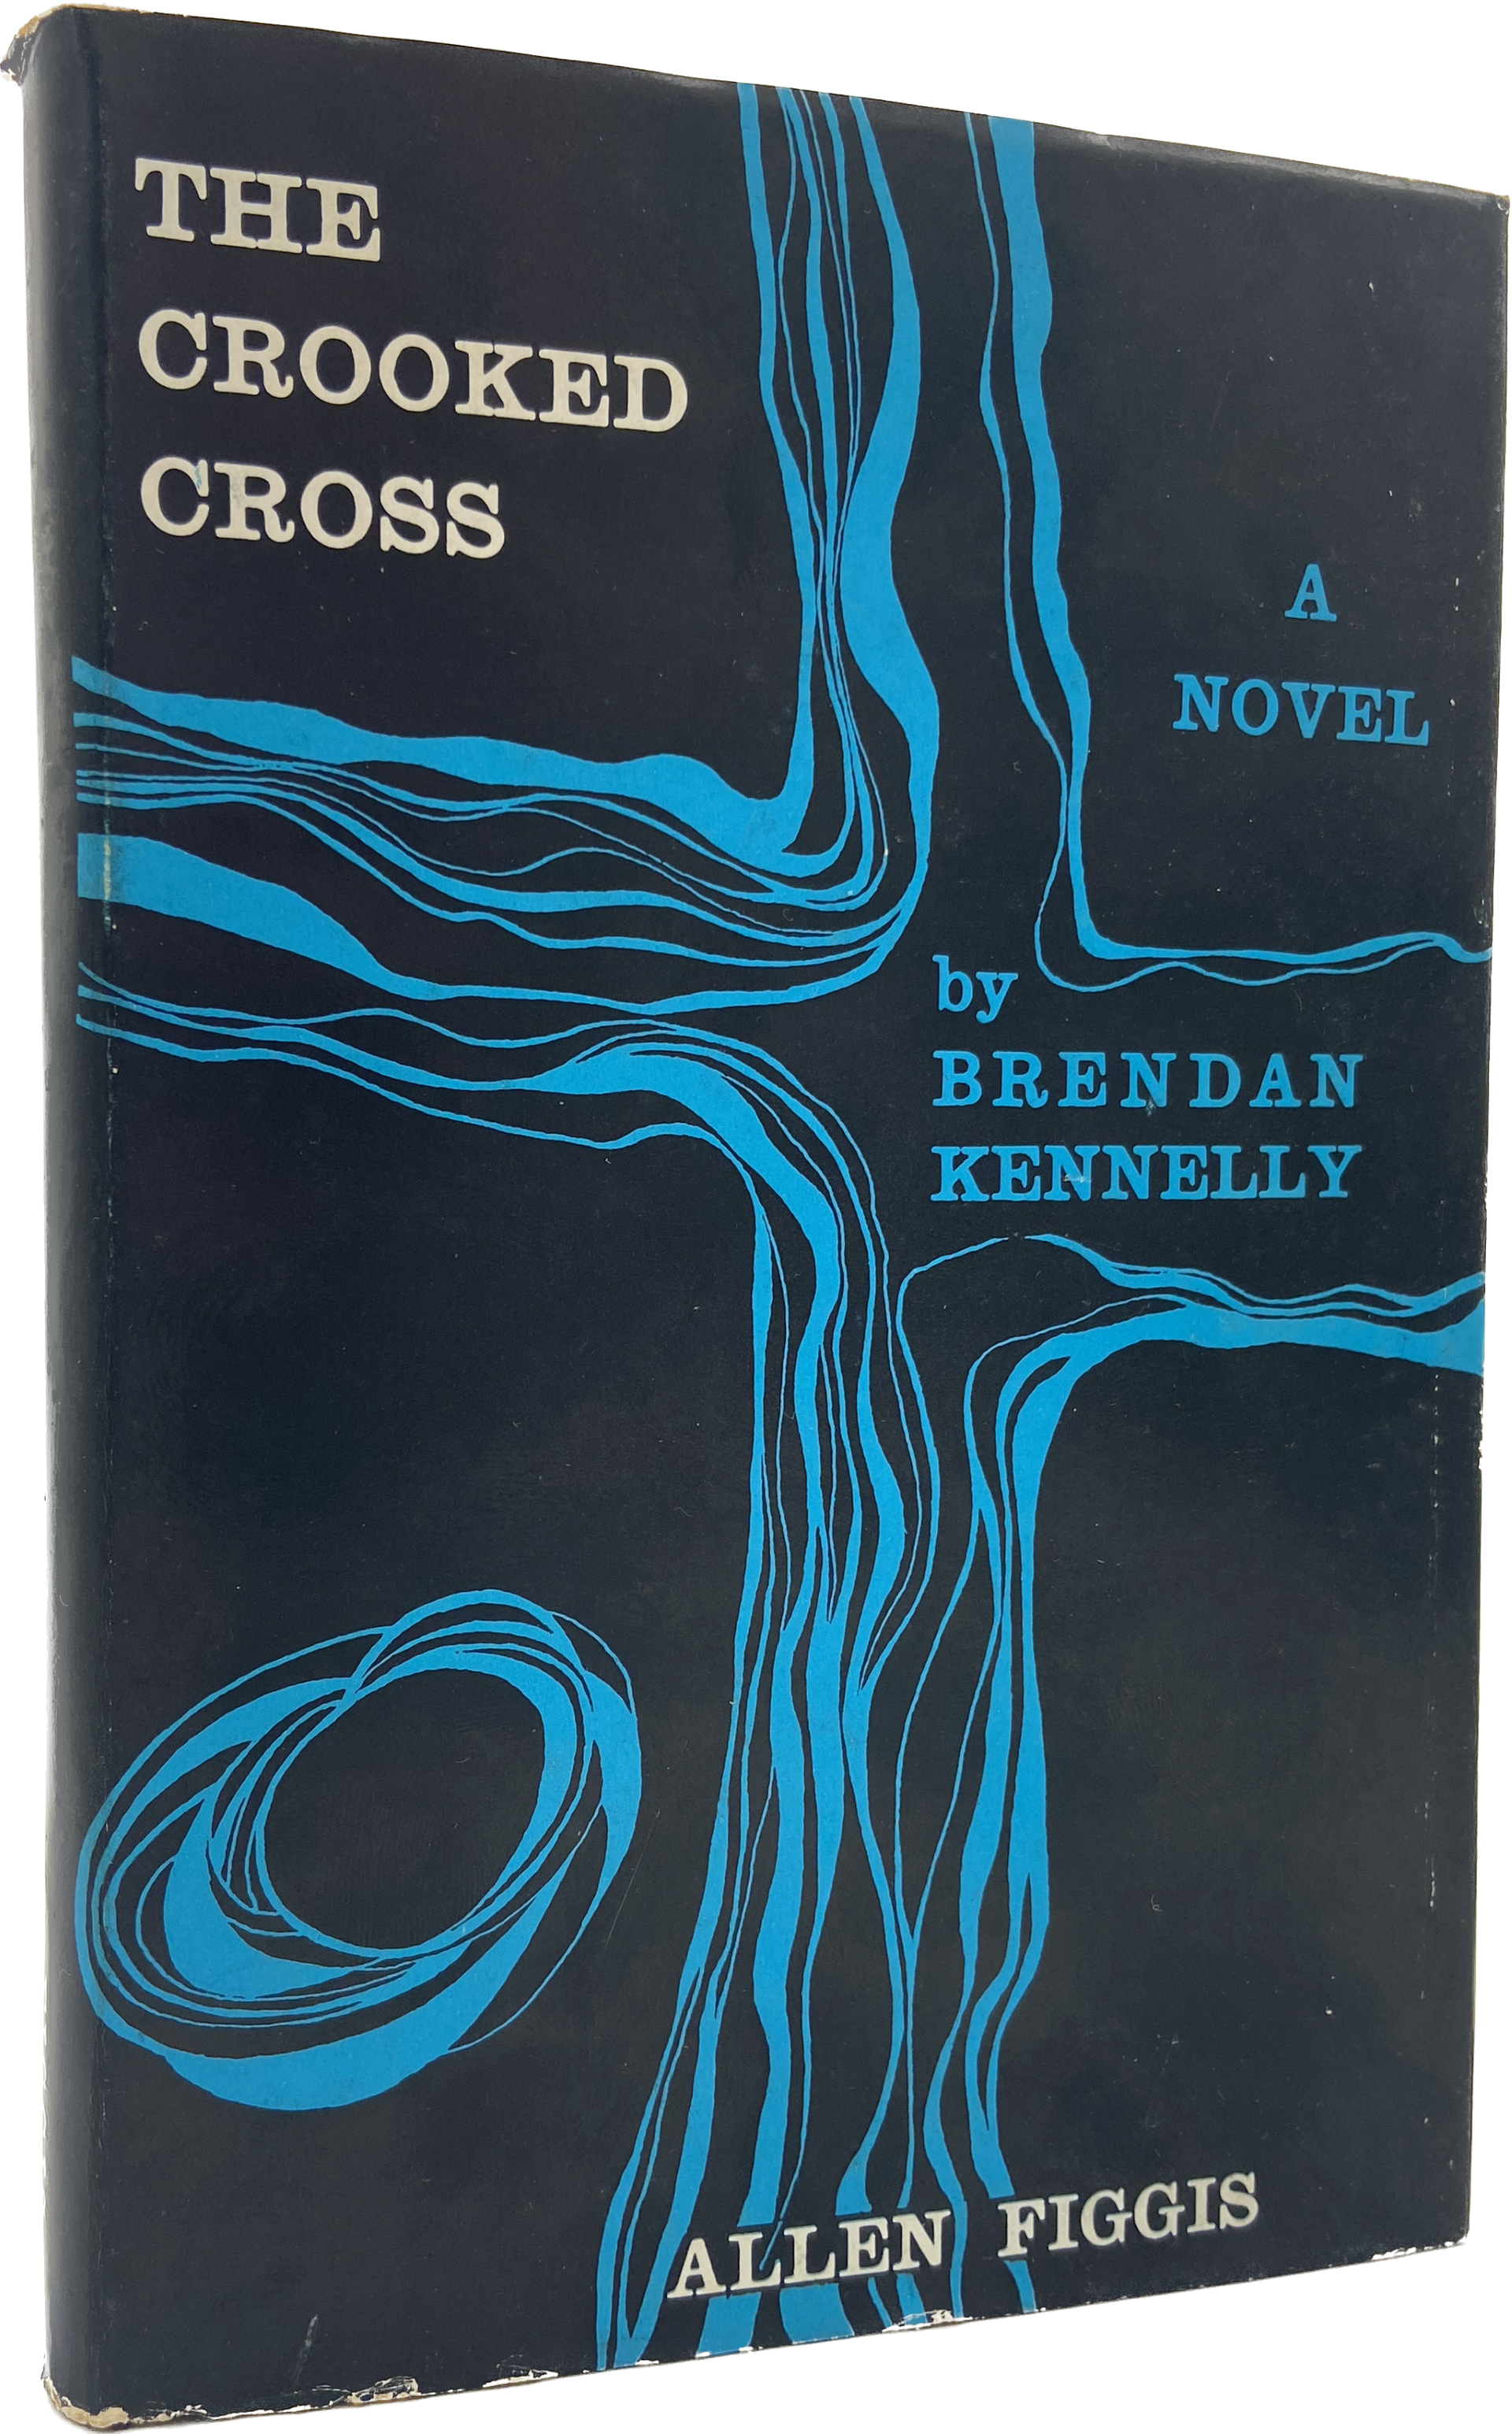 The Crooked Cross by Brendan Kennelly